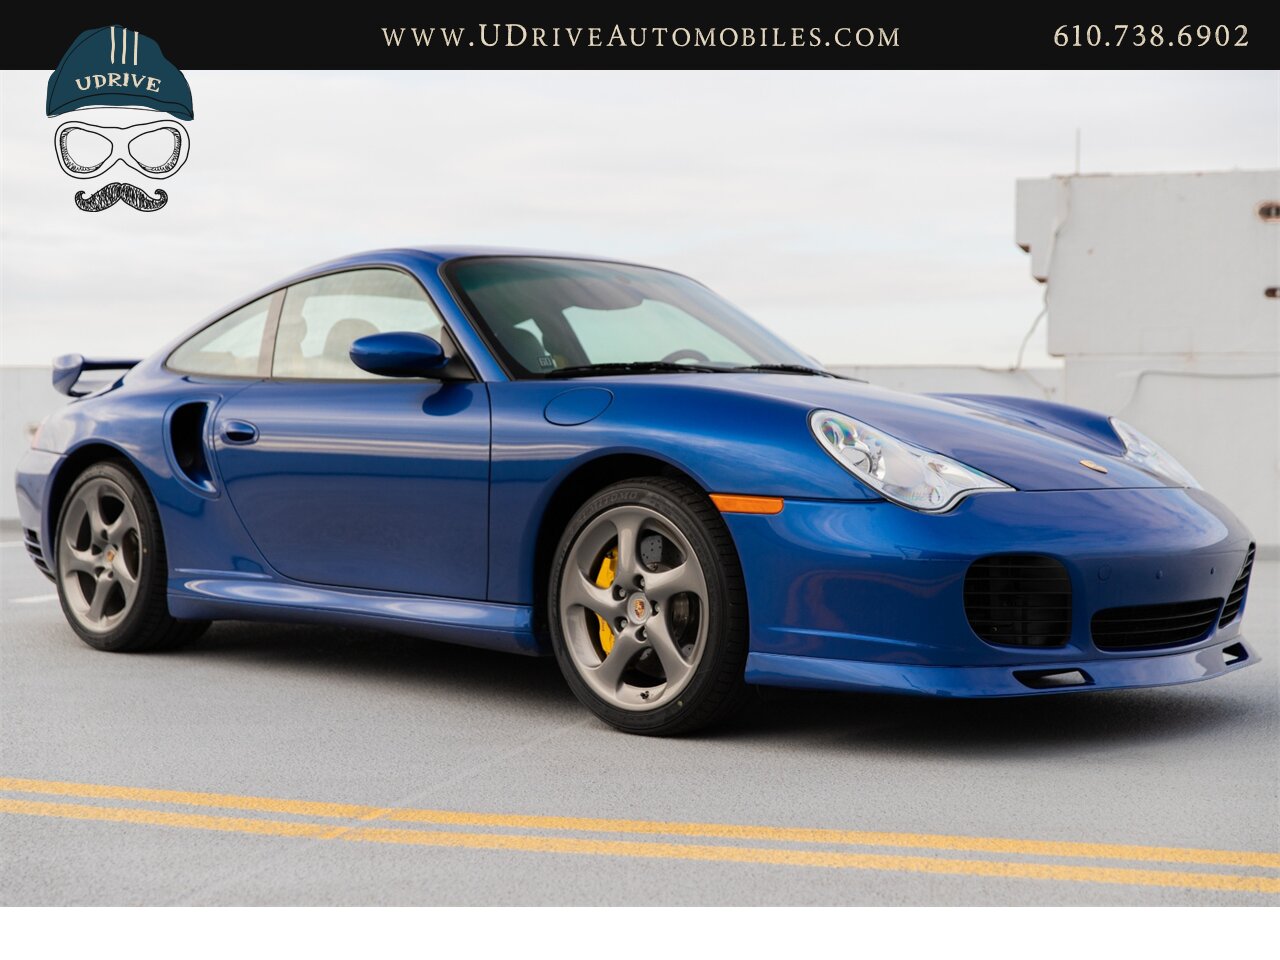 2005 Porsche 911 Turbo S Factory Aerokit Extremely Rare Cobalt Blue  Yellow Deviating Stitching 1 of a Kind Spec $160k MSRP - Photo 16 - West Chester, PA 19382